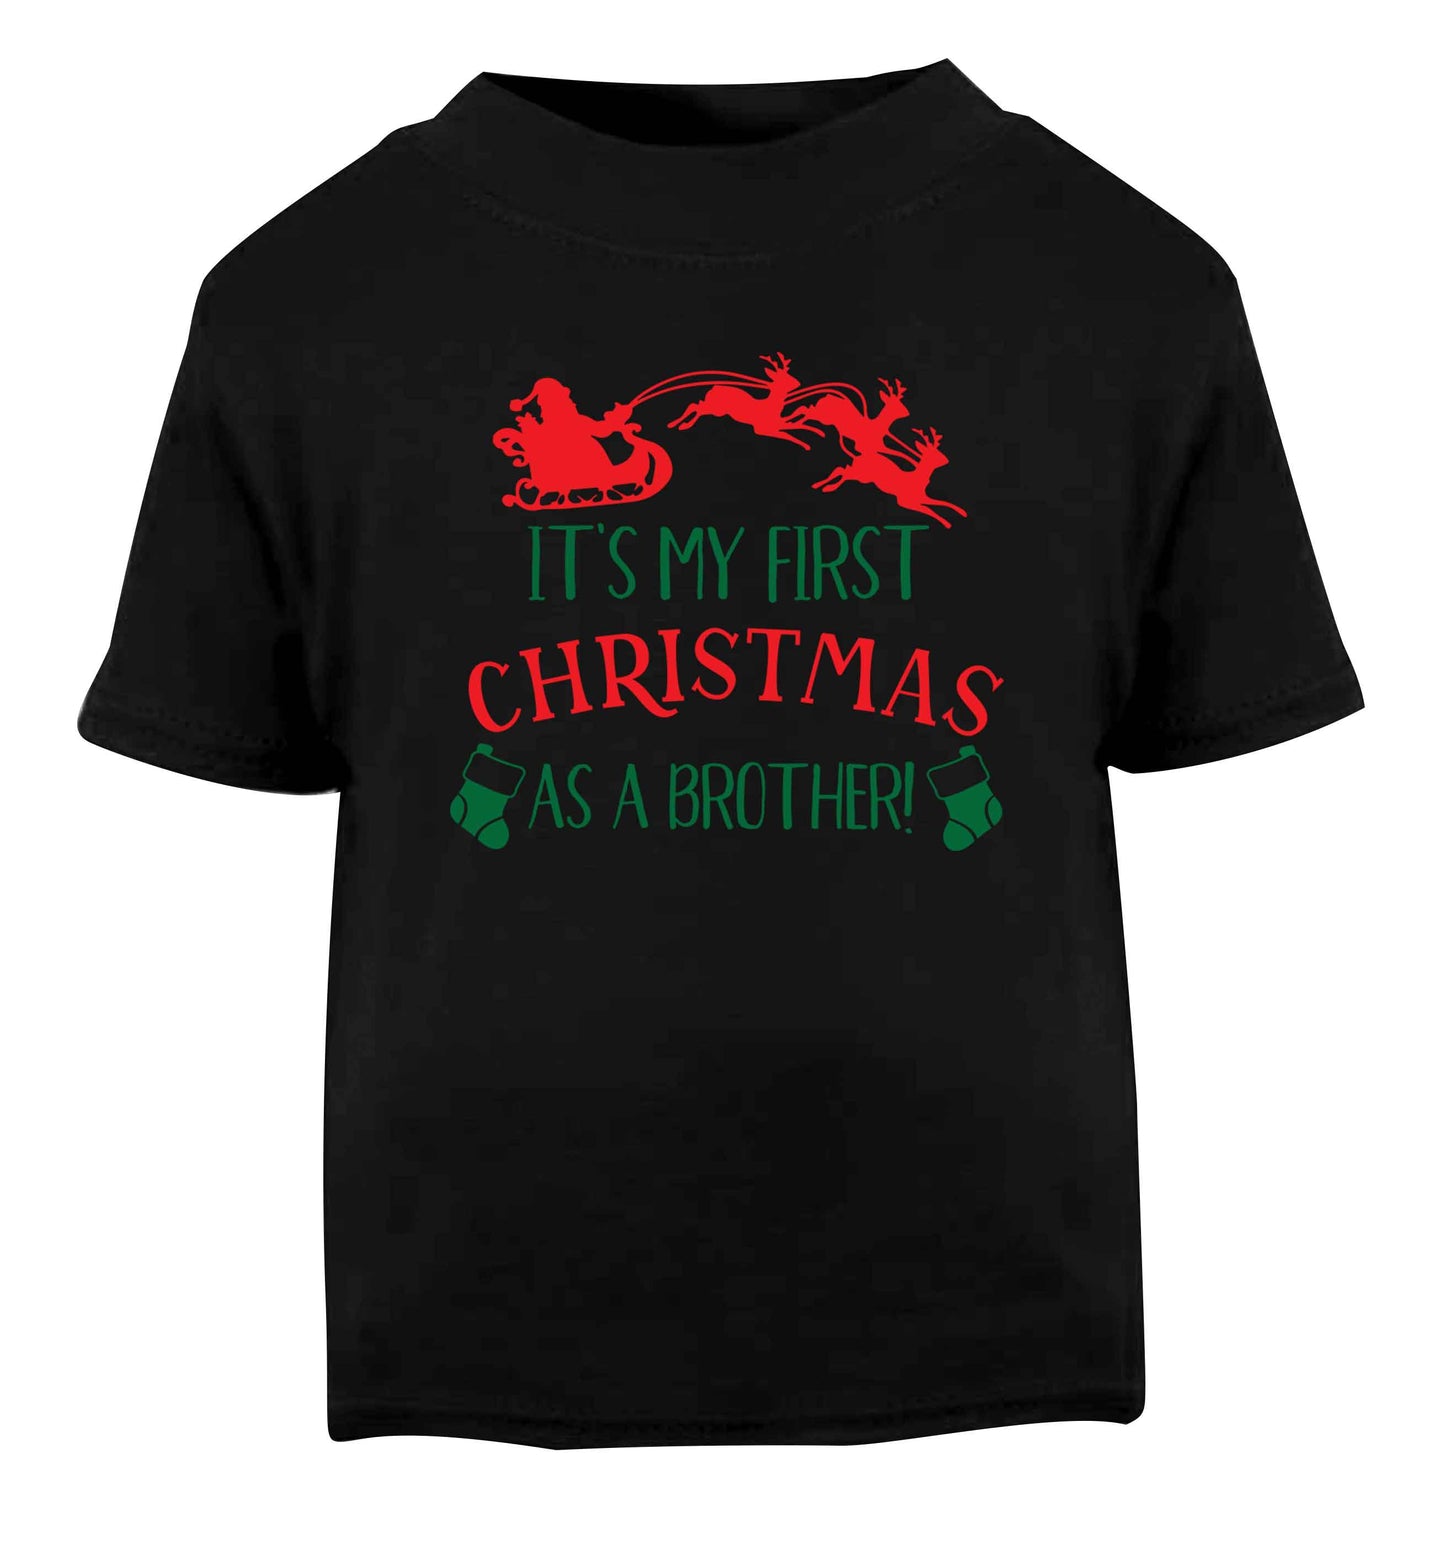 It's my first Christmas as a brother! Black Baby Toddler Tshirt 2 years